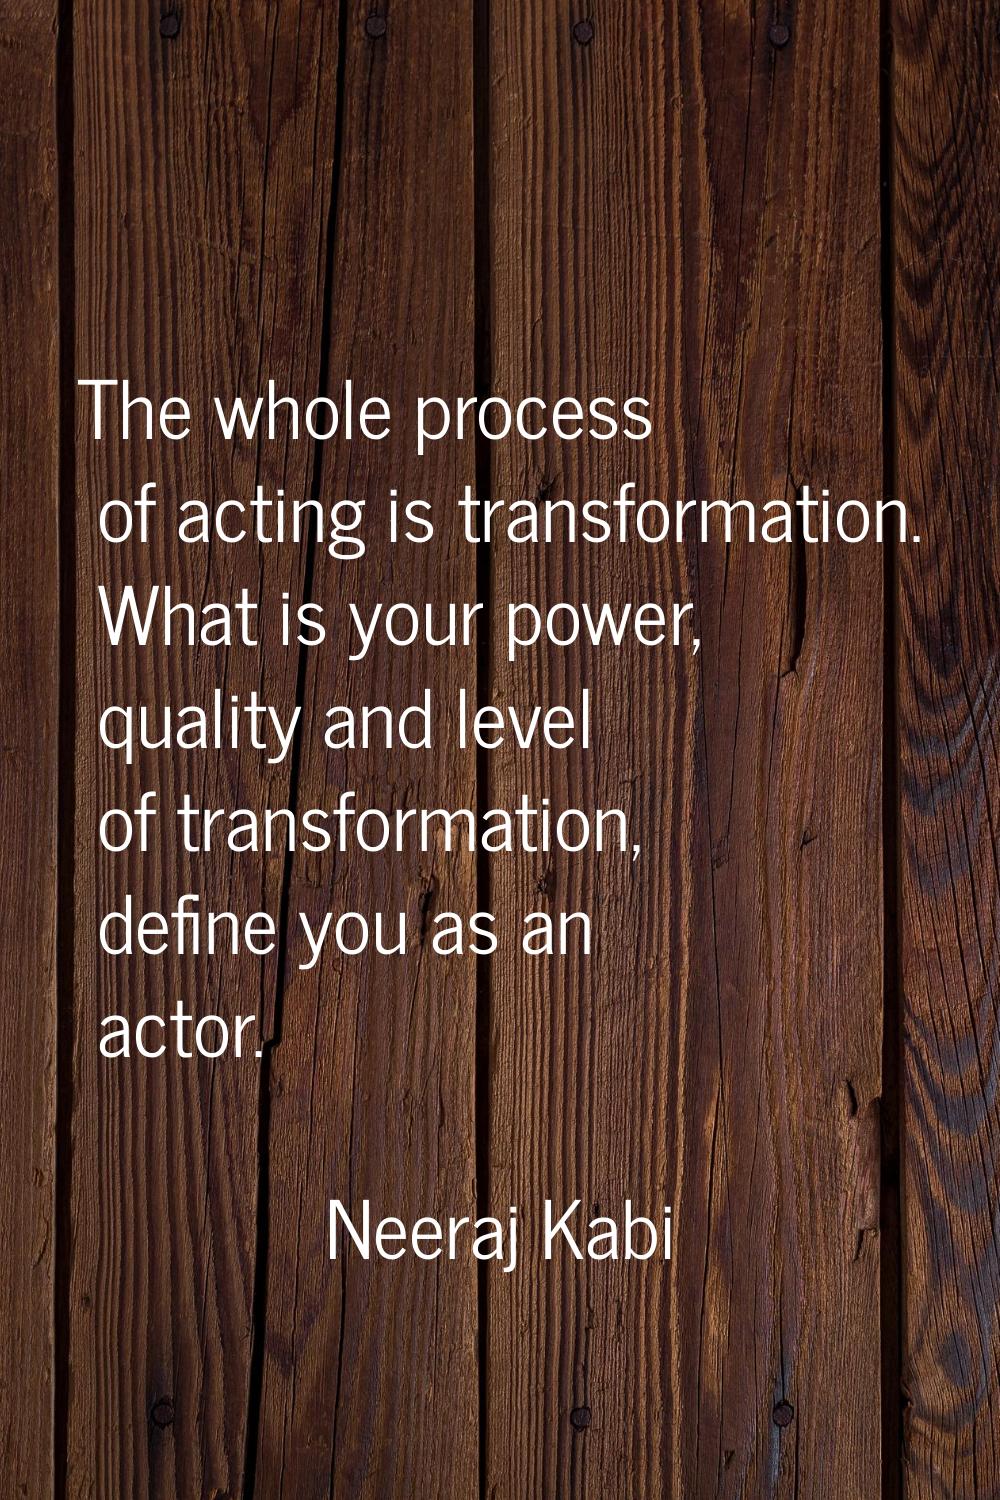 The whole process of acting is transformation. What is your power, quality and level of transformat